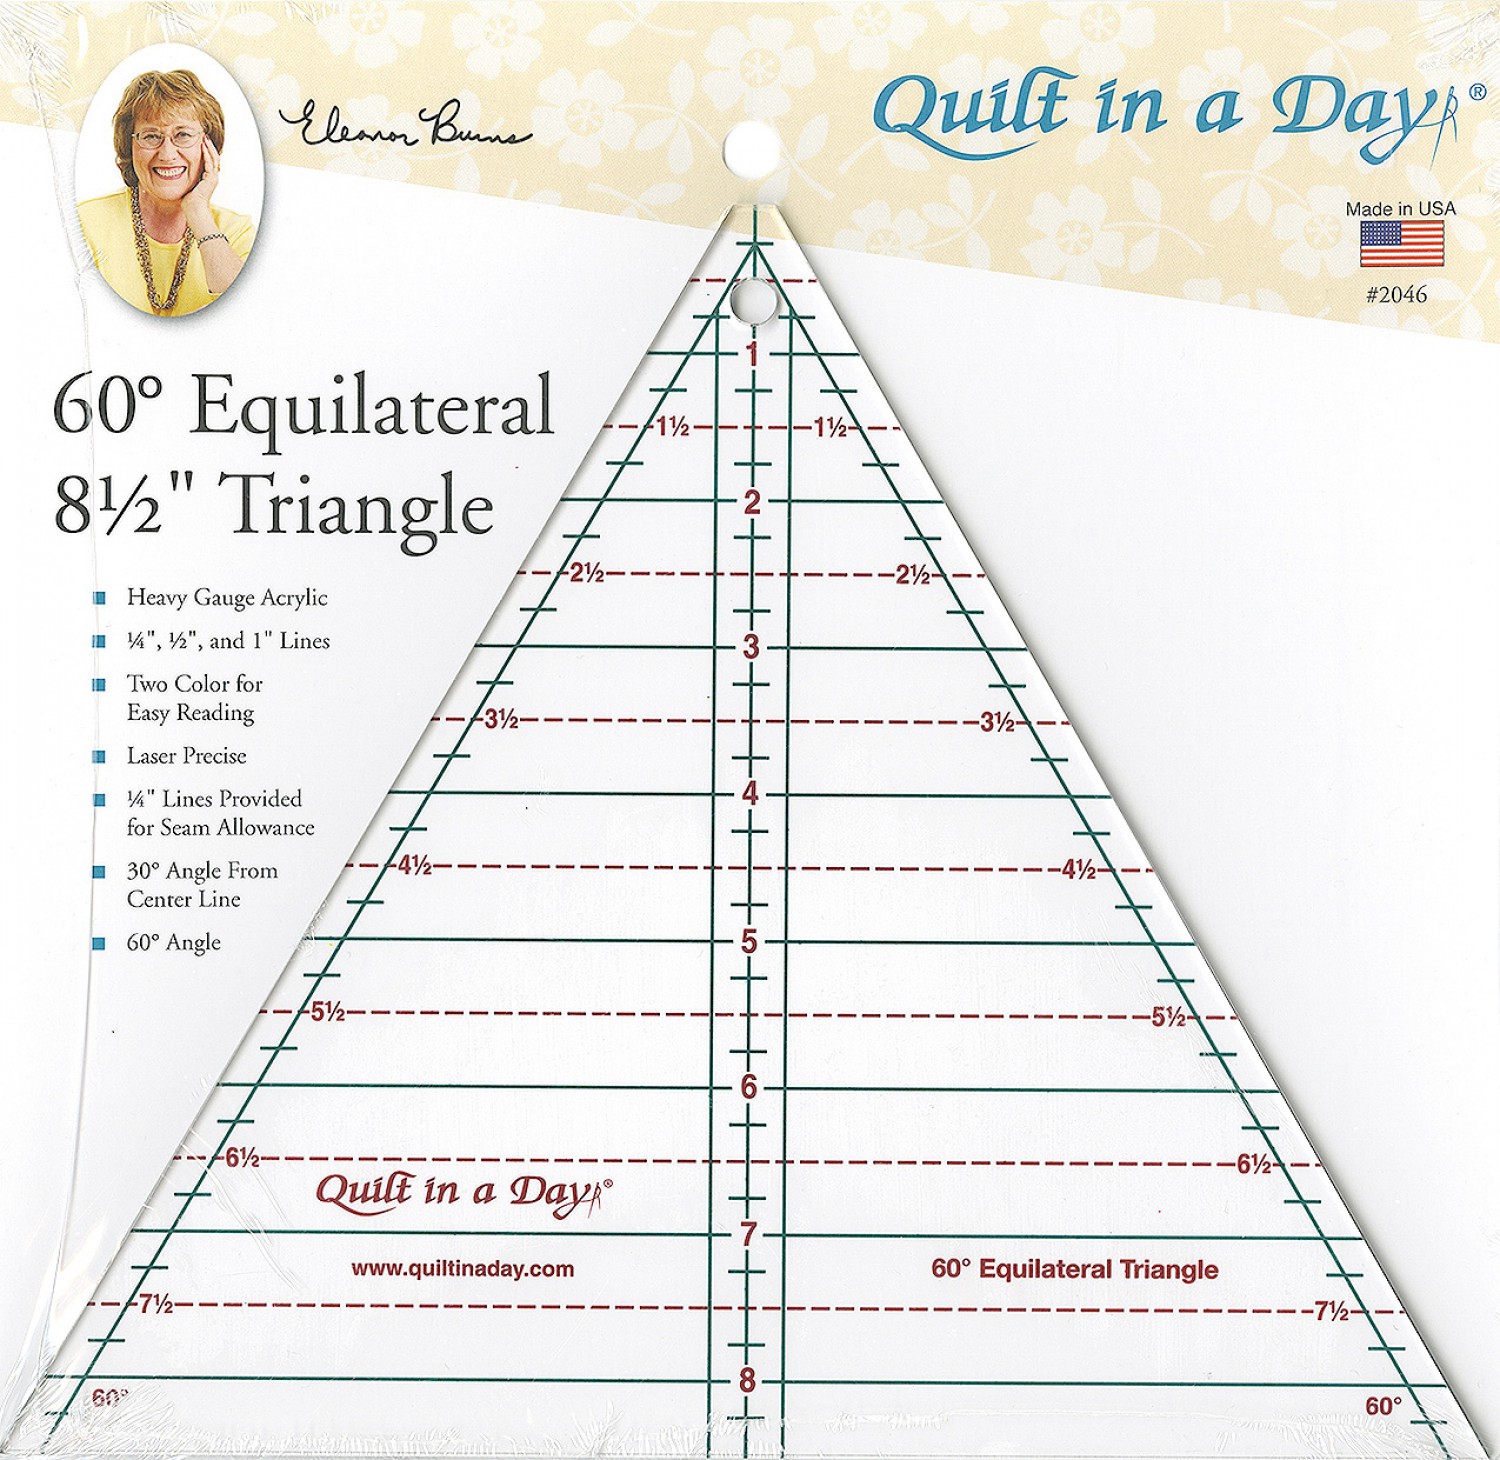 60° Equilateral Triangle